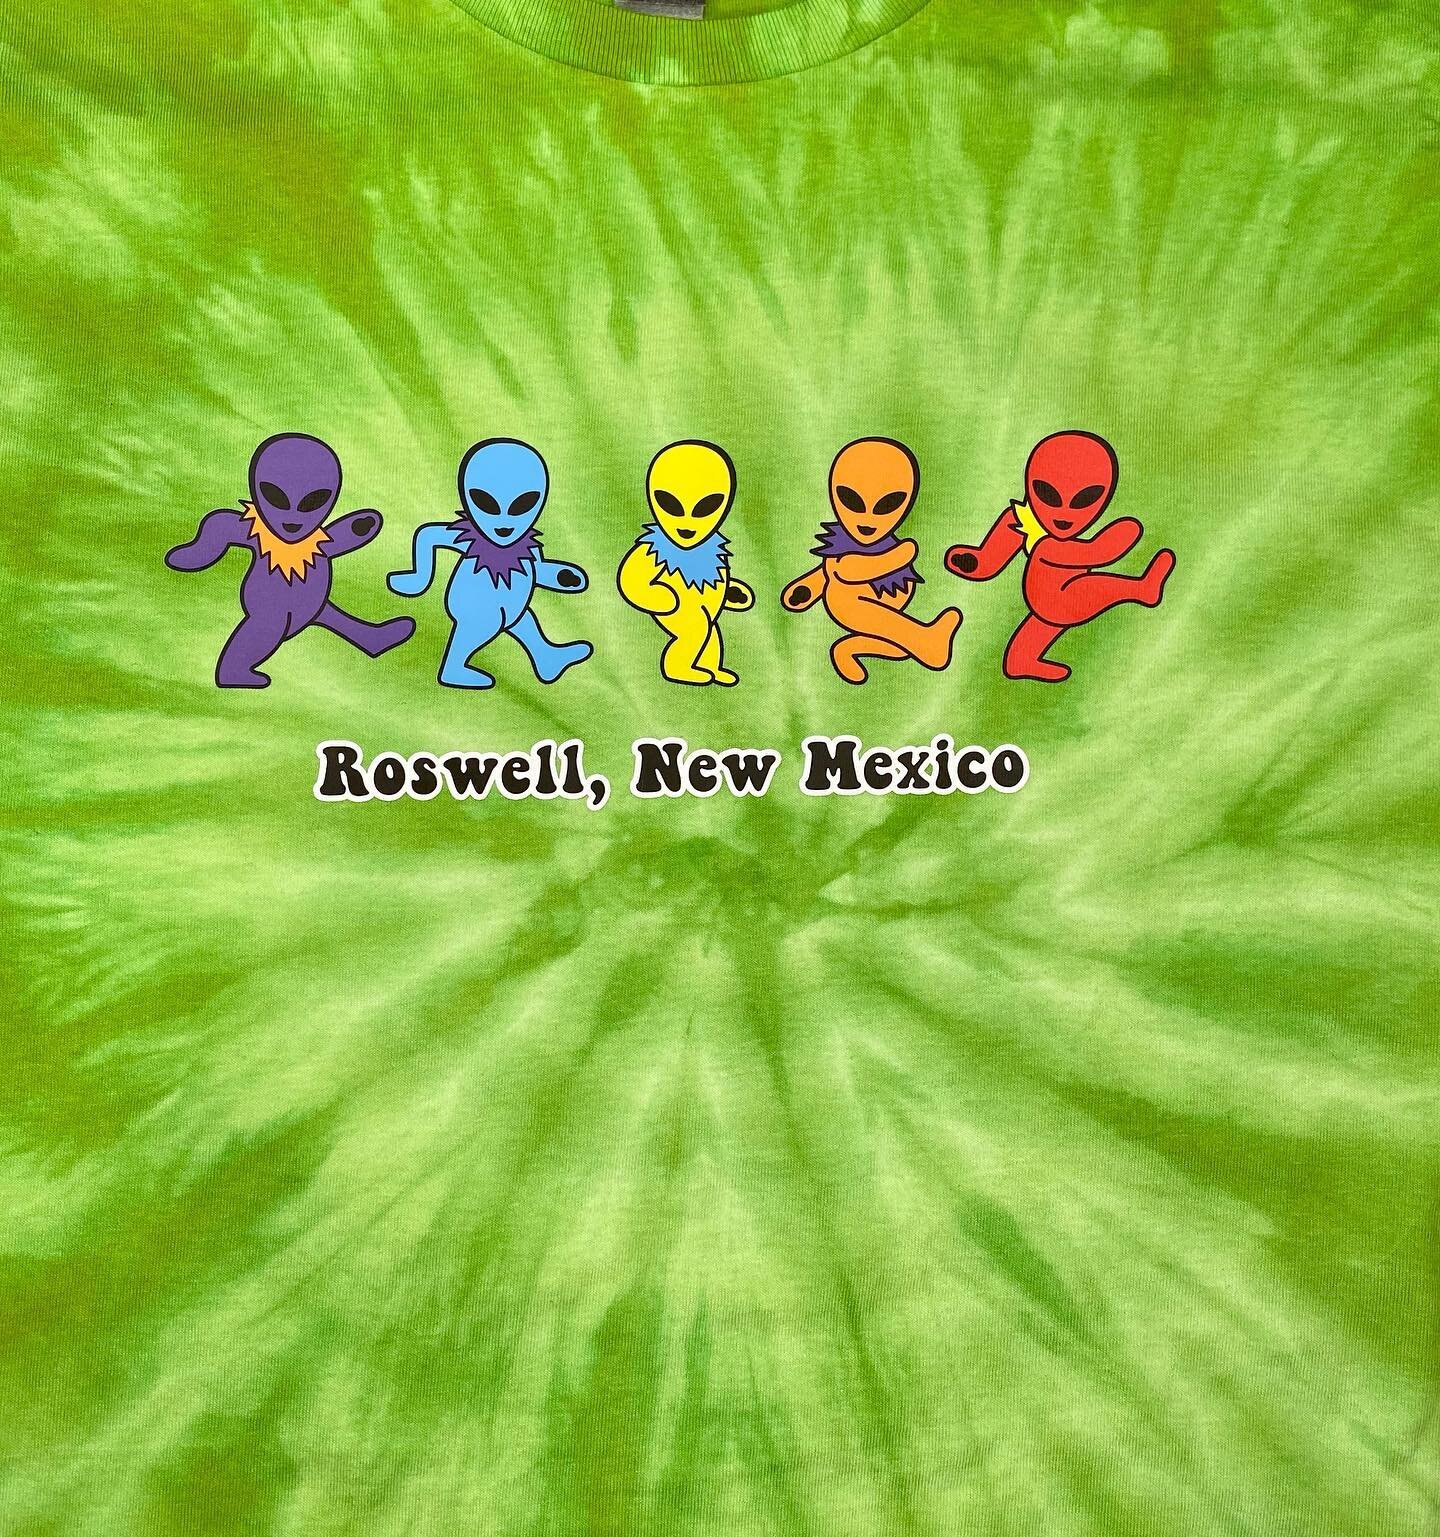 Come and get one of our new Grateful Alien tie dye shirts!
.
.
@jlt21 always provides us with amazing artwork!

#moonmanprinting #downtownroswell #roswell #mainstreetroswell #roswellnm #aliens #roswellaliens #aliensinroswell #alienshirt #tiedye #grat